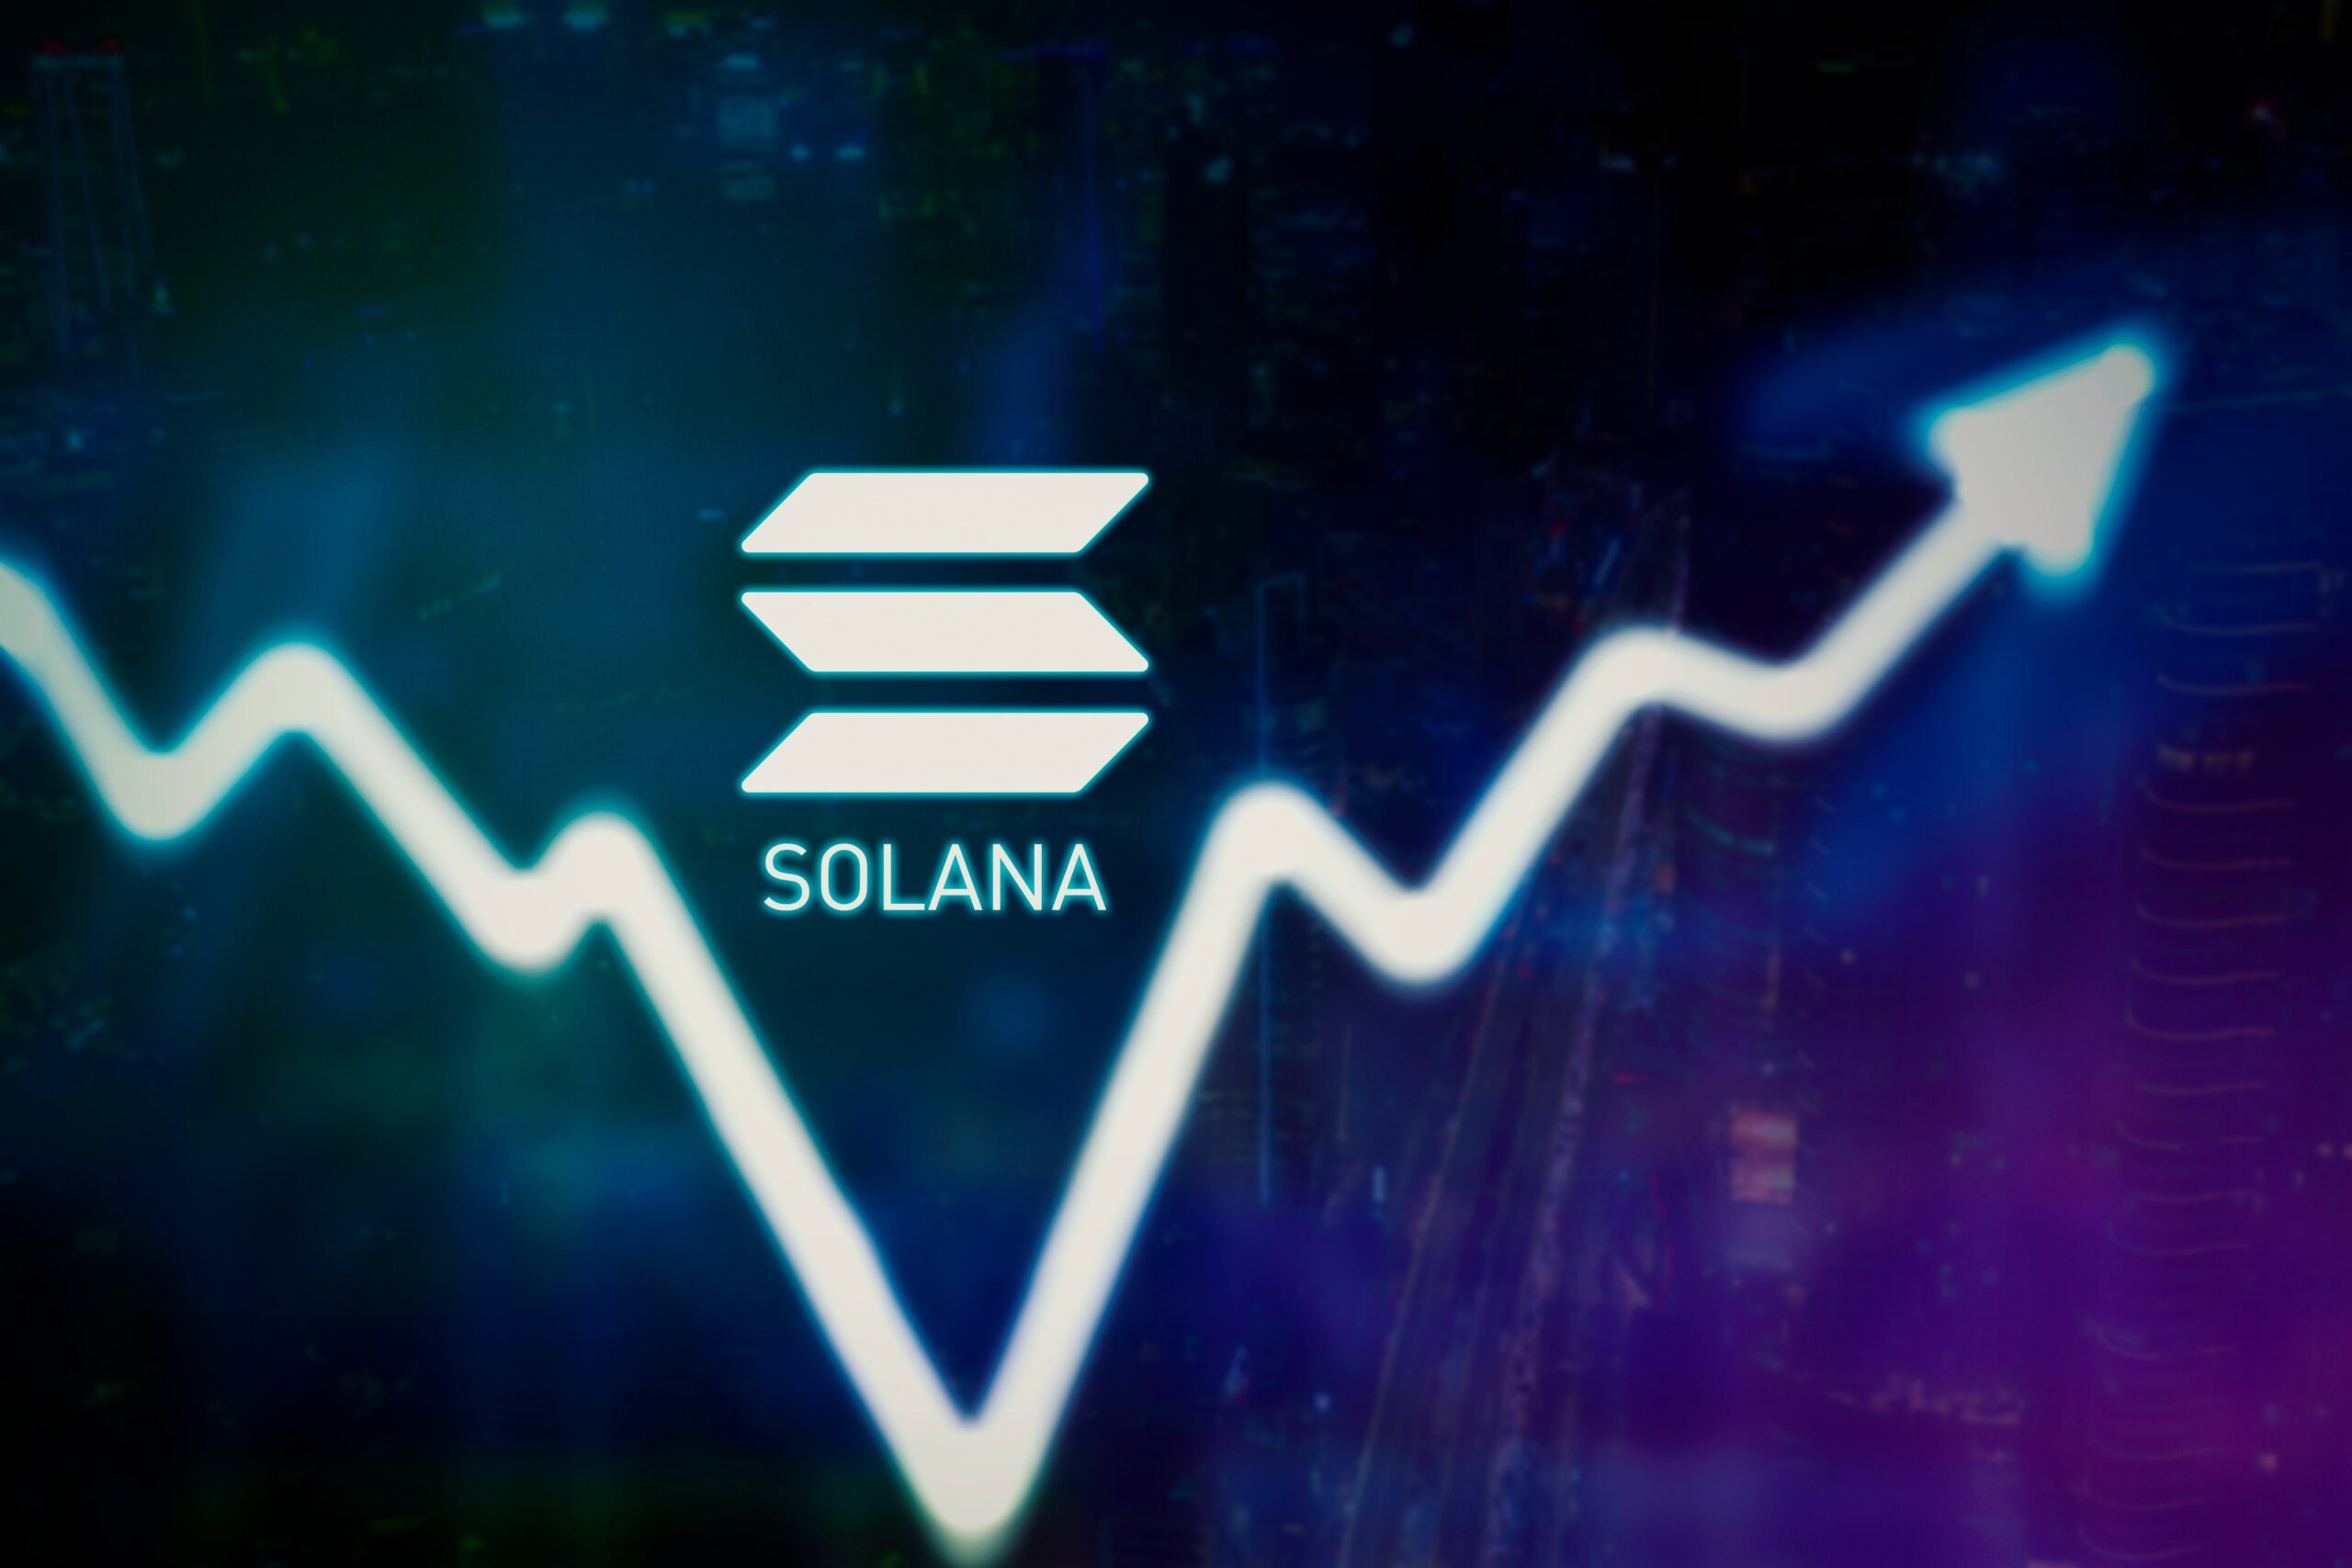 A Summary of the Solana Decentralized Finance Space